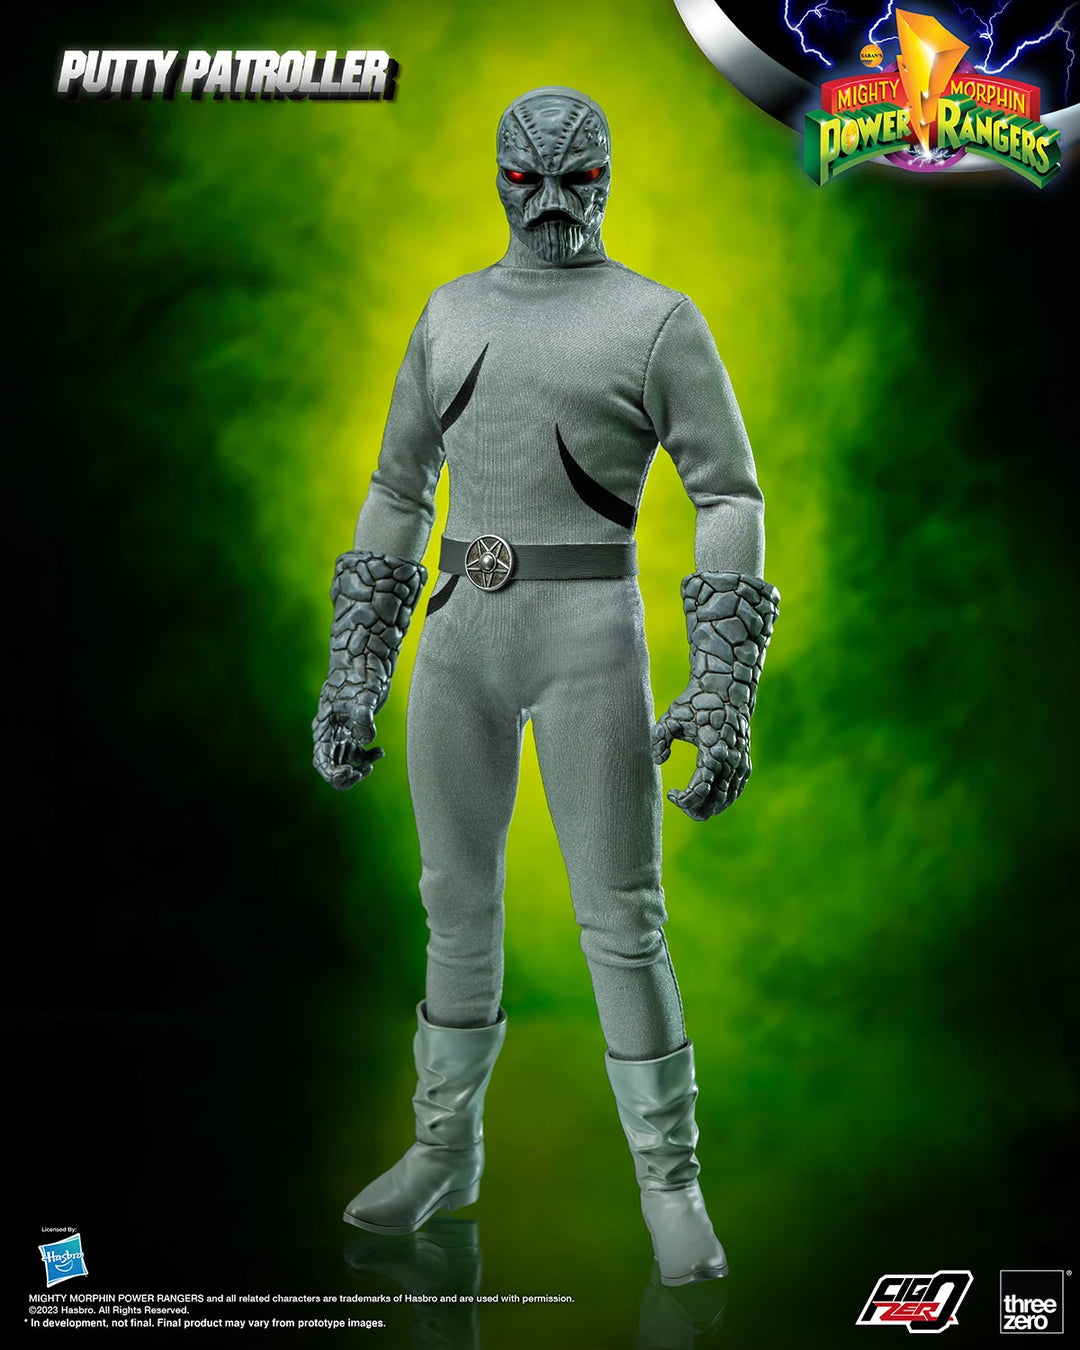 Mighty Morphin Power Rangers FigZero Putty Patroller 1/6 Scale Figure